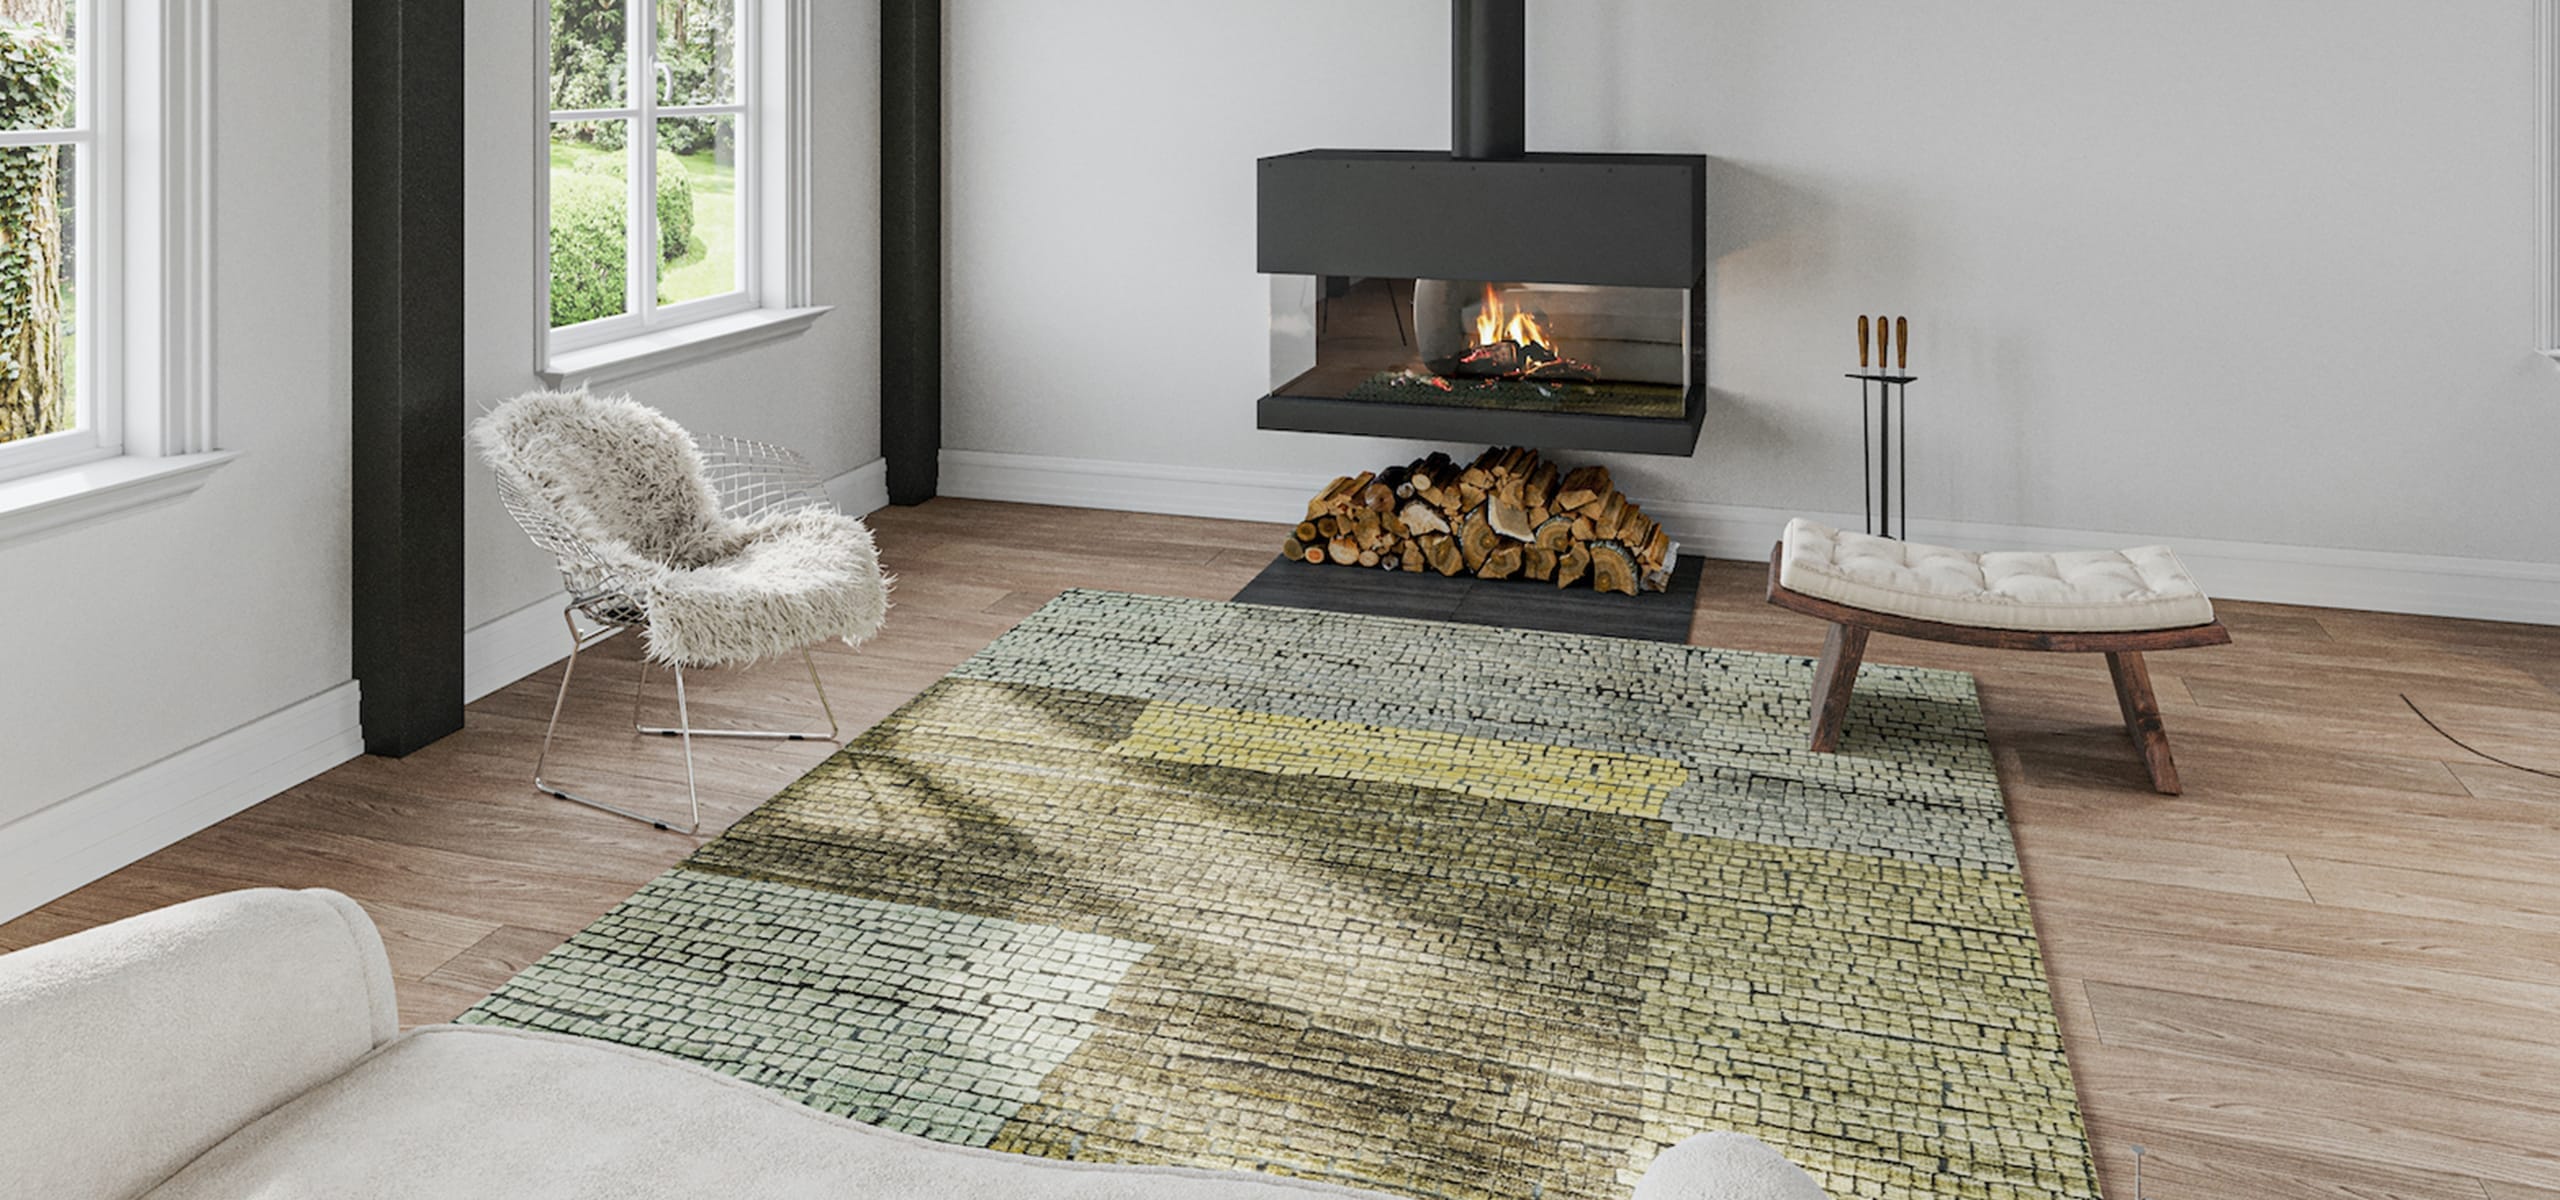 How to Use an Area Rug on a Hardwood Floor to Elevate Your Space